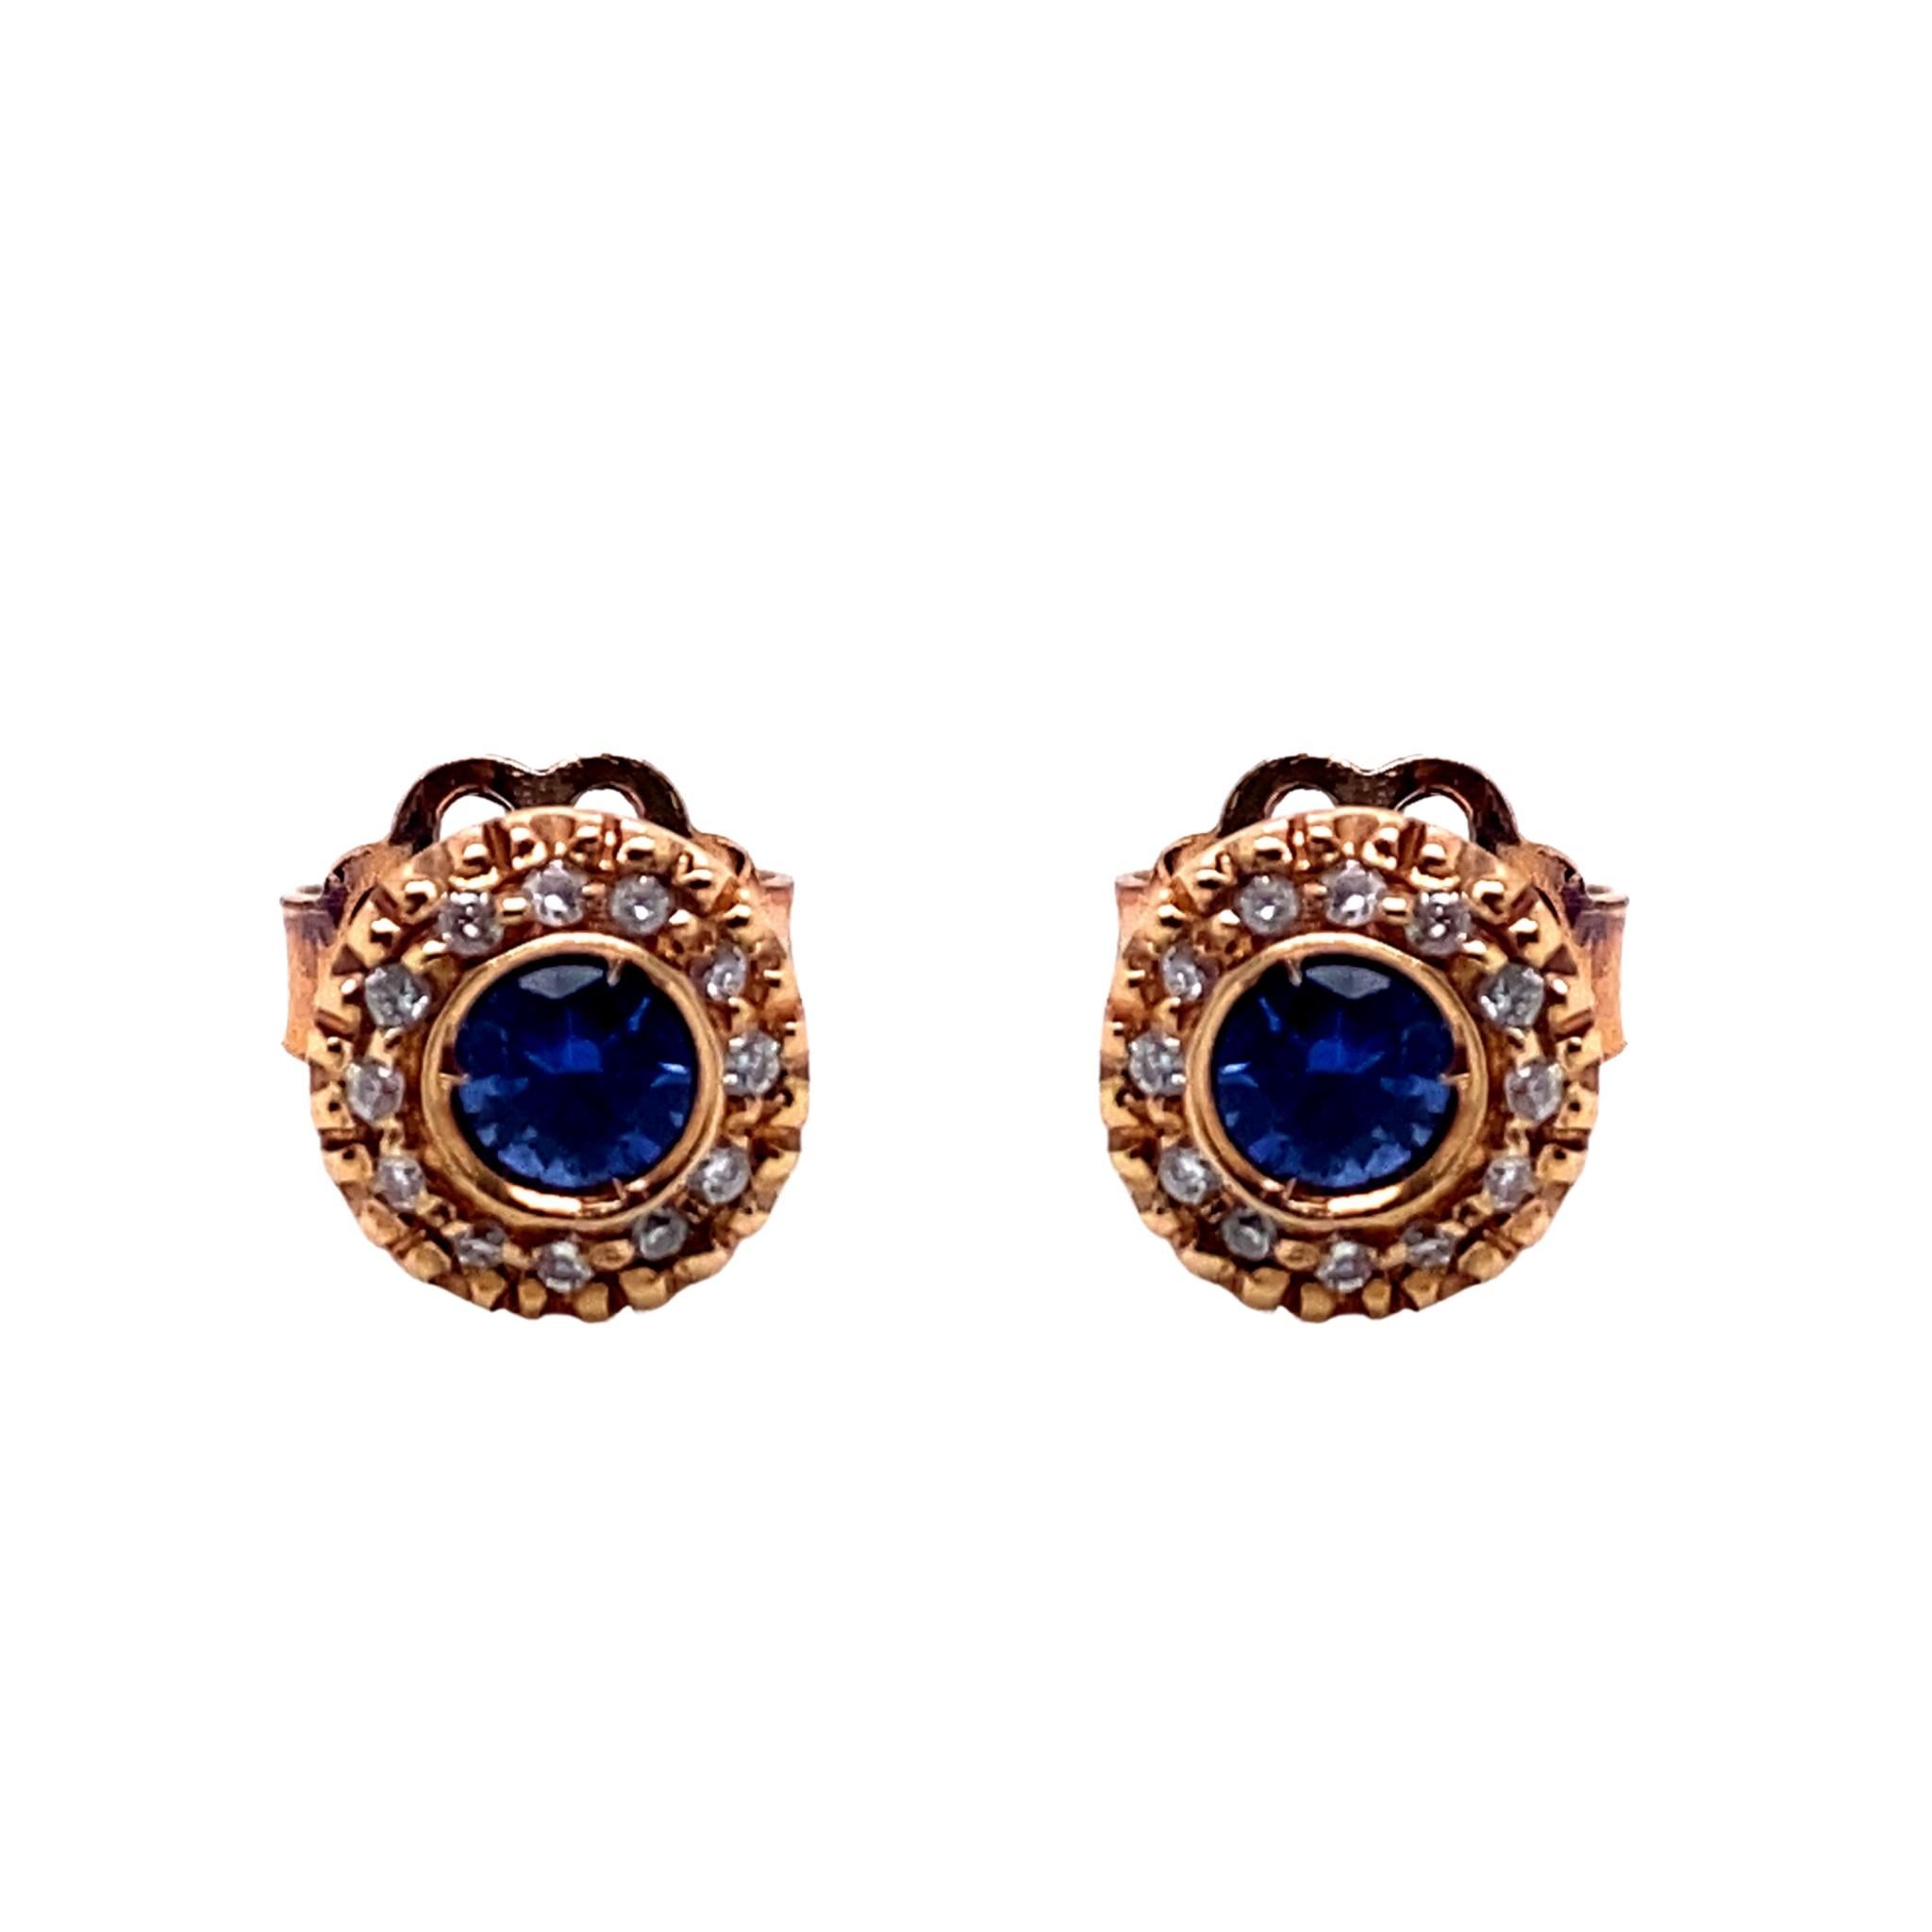 Classically beautiful stud earrings that convert into three different pairs of earrings. The 18-karat yellow gold earrings contain .38-carats of G VS white diamonds and .20 carats of a single sapphire. The second circle of diamonds can be removed,